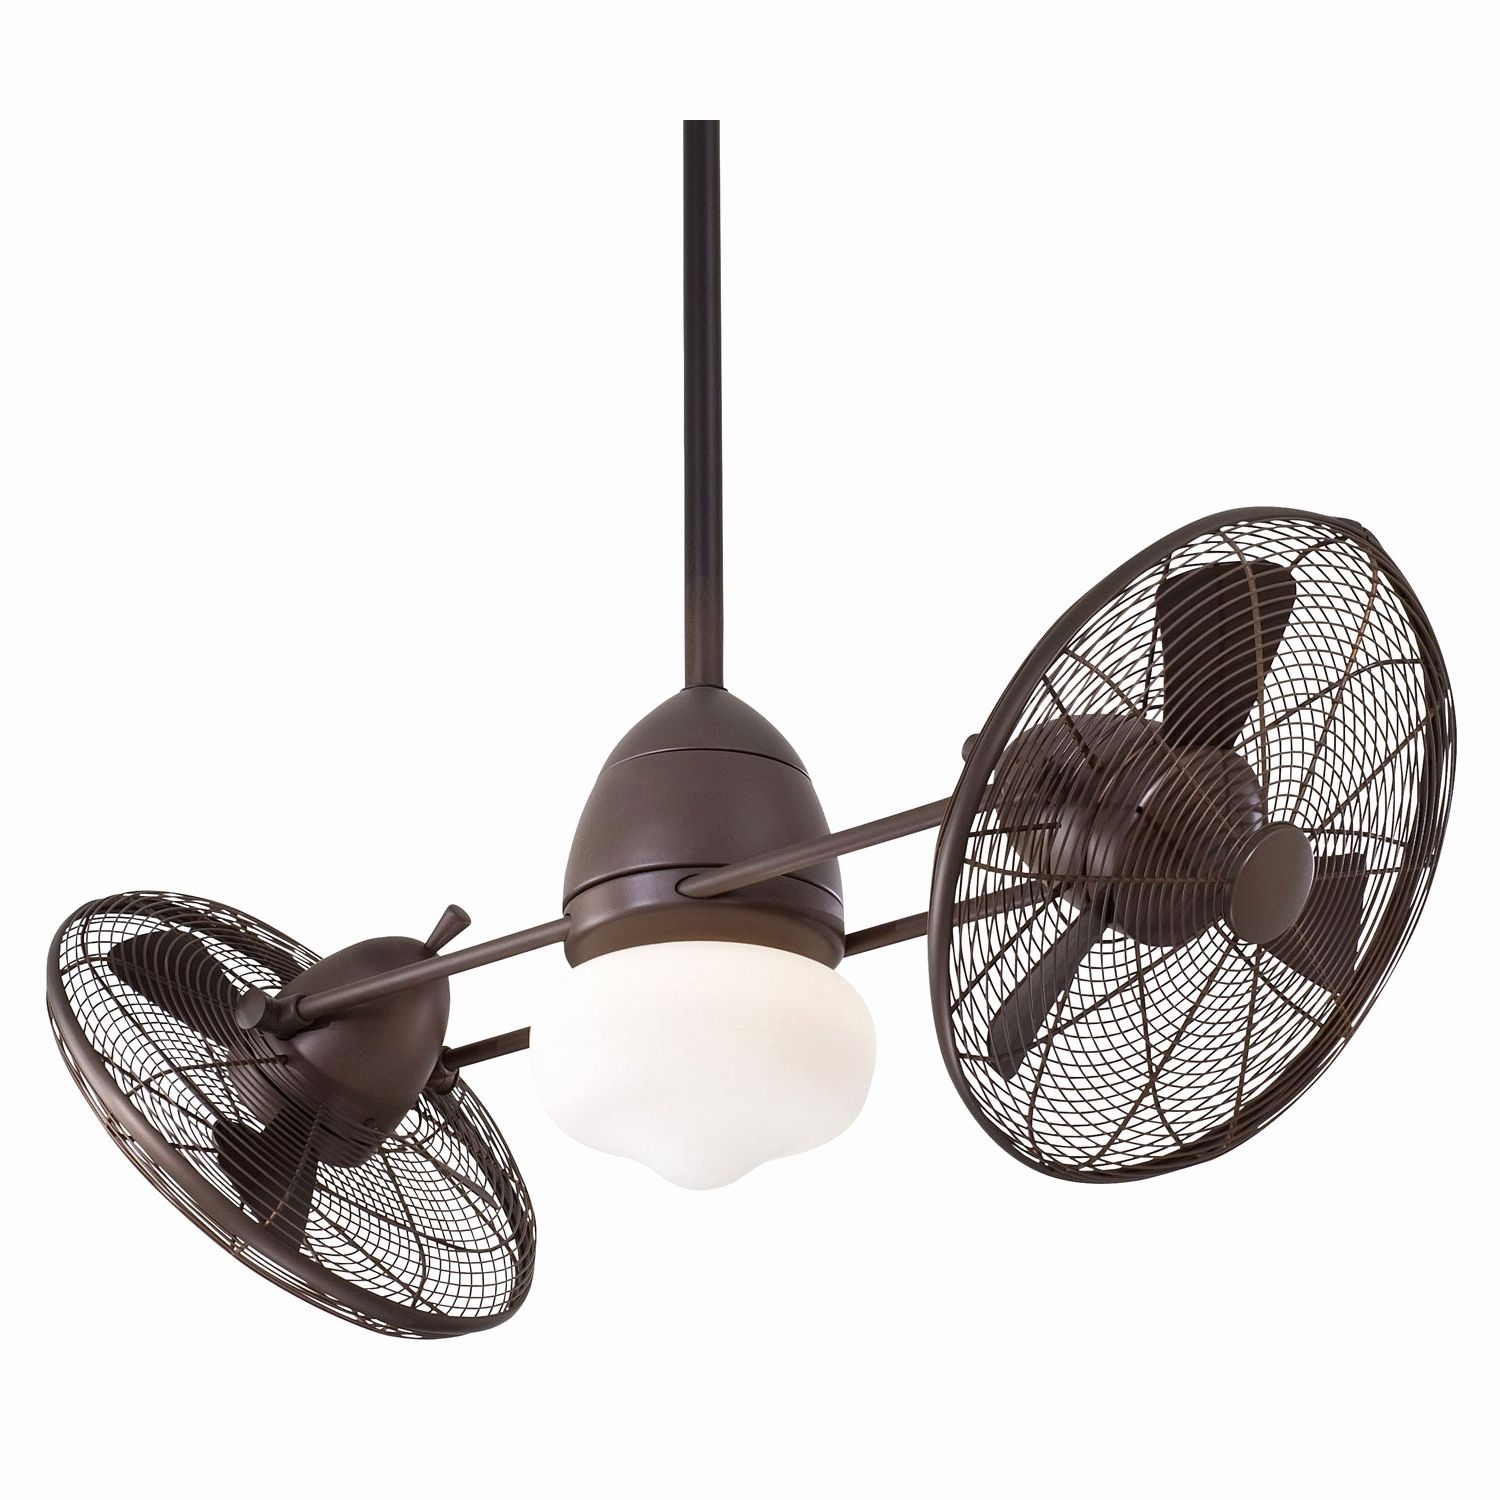 72 Inch Outdoor Ceiling Fans With Regard To Most Up To Date 72 Inch Ceiling Fan Lowes Lovely Ceiling Fan 72 Inch Outdoor Ceiling (View 16 of 20)